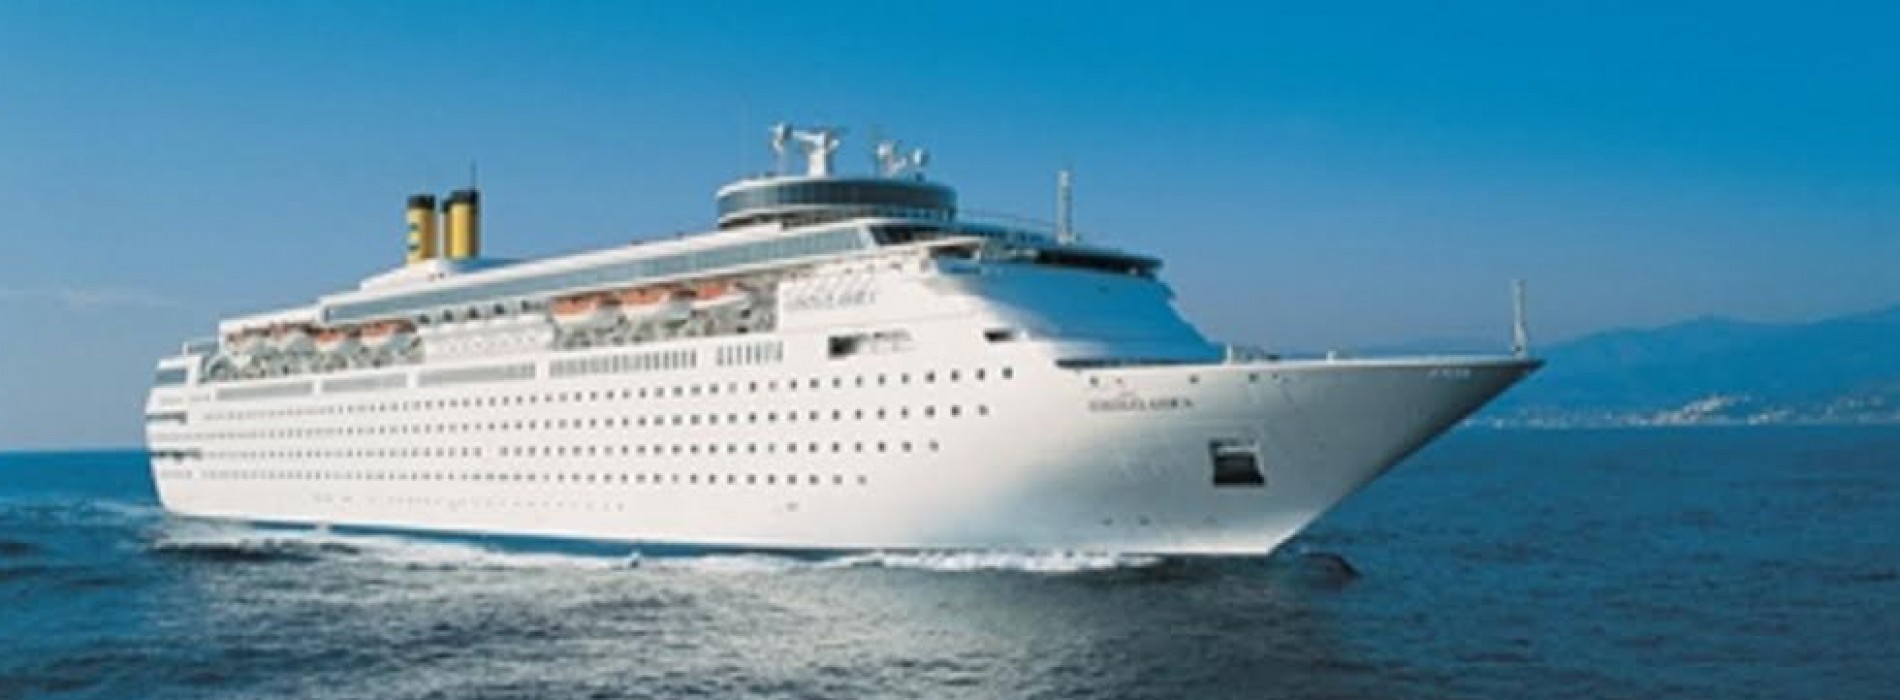 This December embark on the highly anticipated Mumbai-Maldives Cruise with Costa Neoclassica